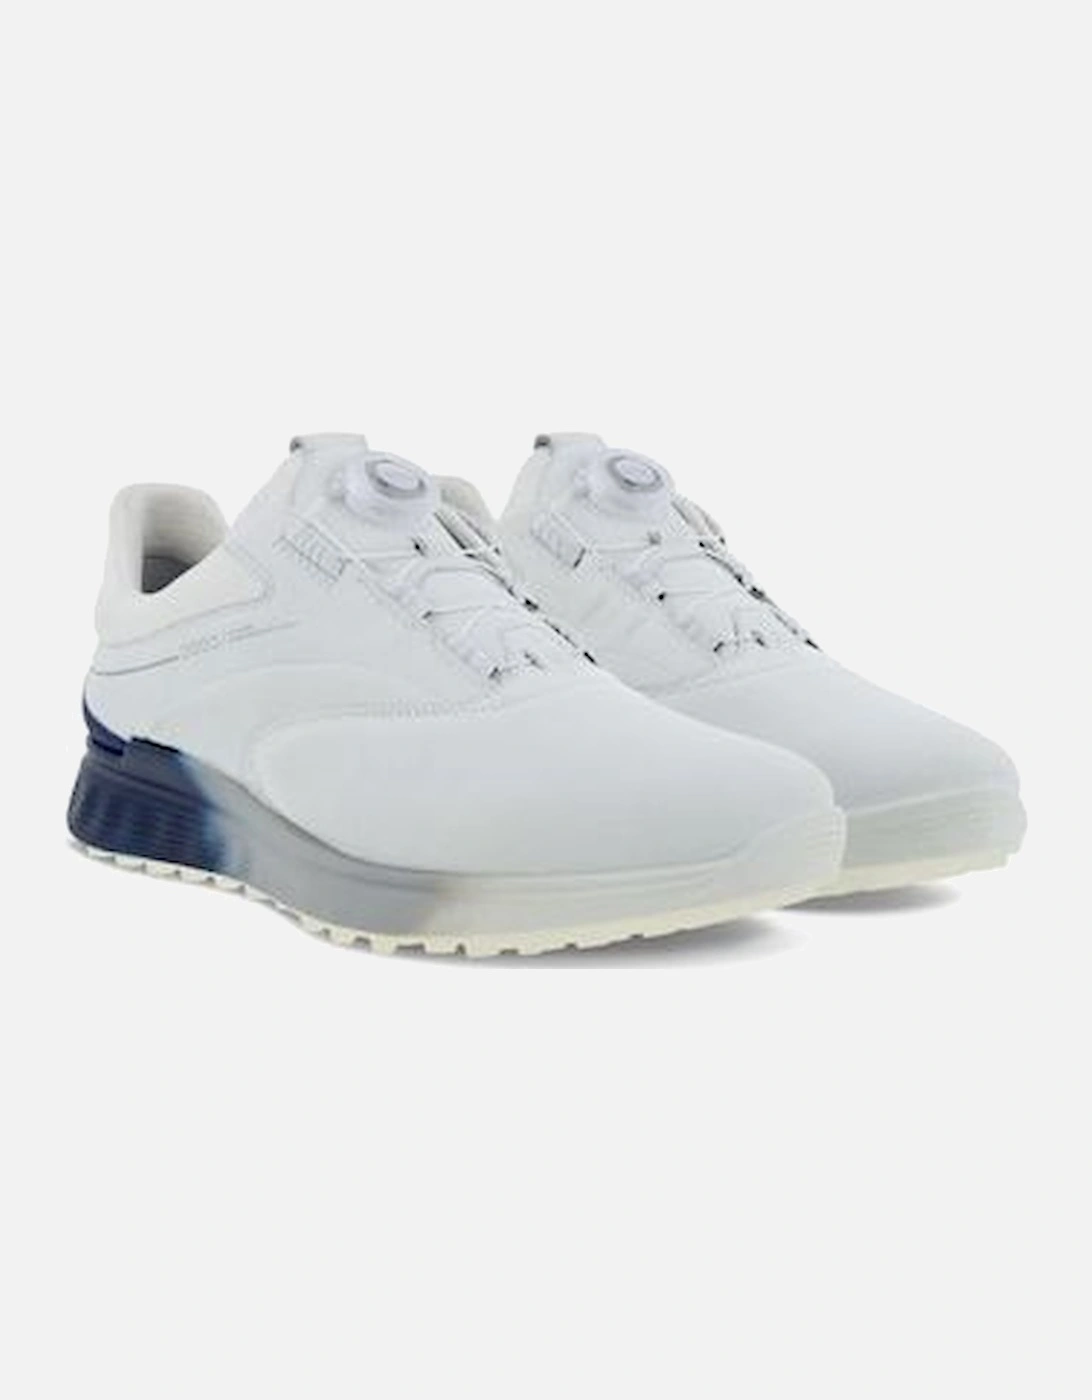 Golf S-three Boa 102954-60616  in white leather, 9 of 8